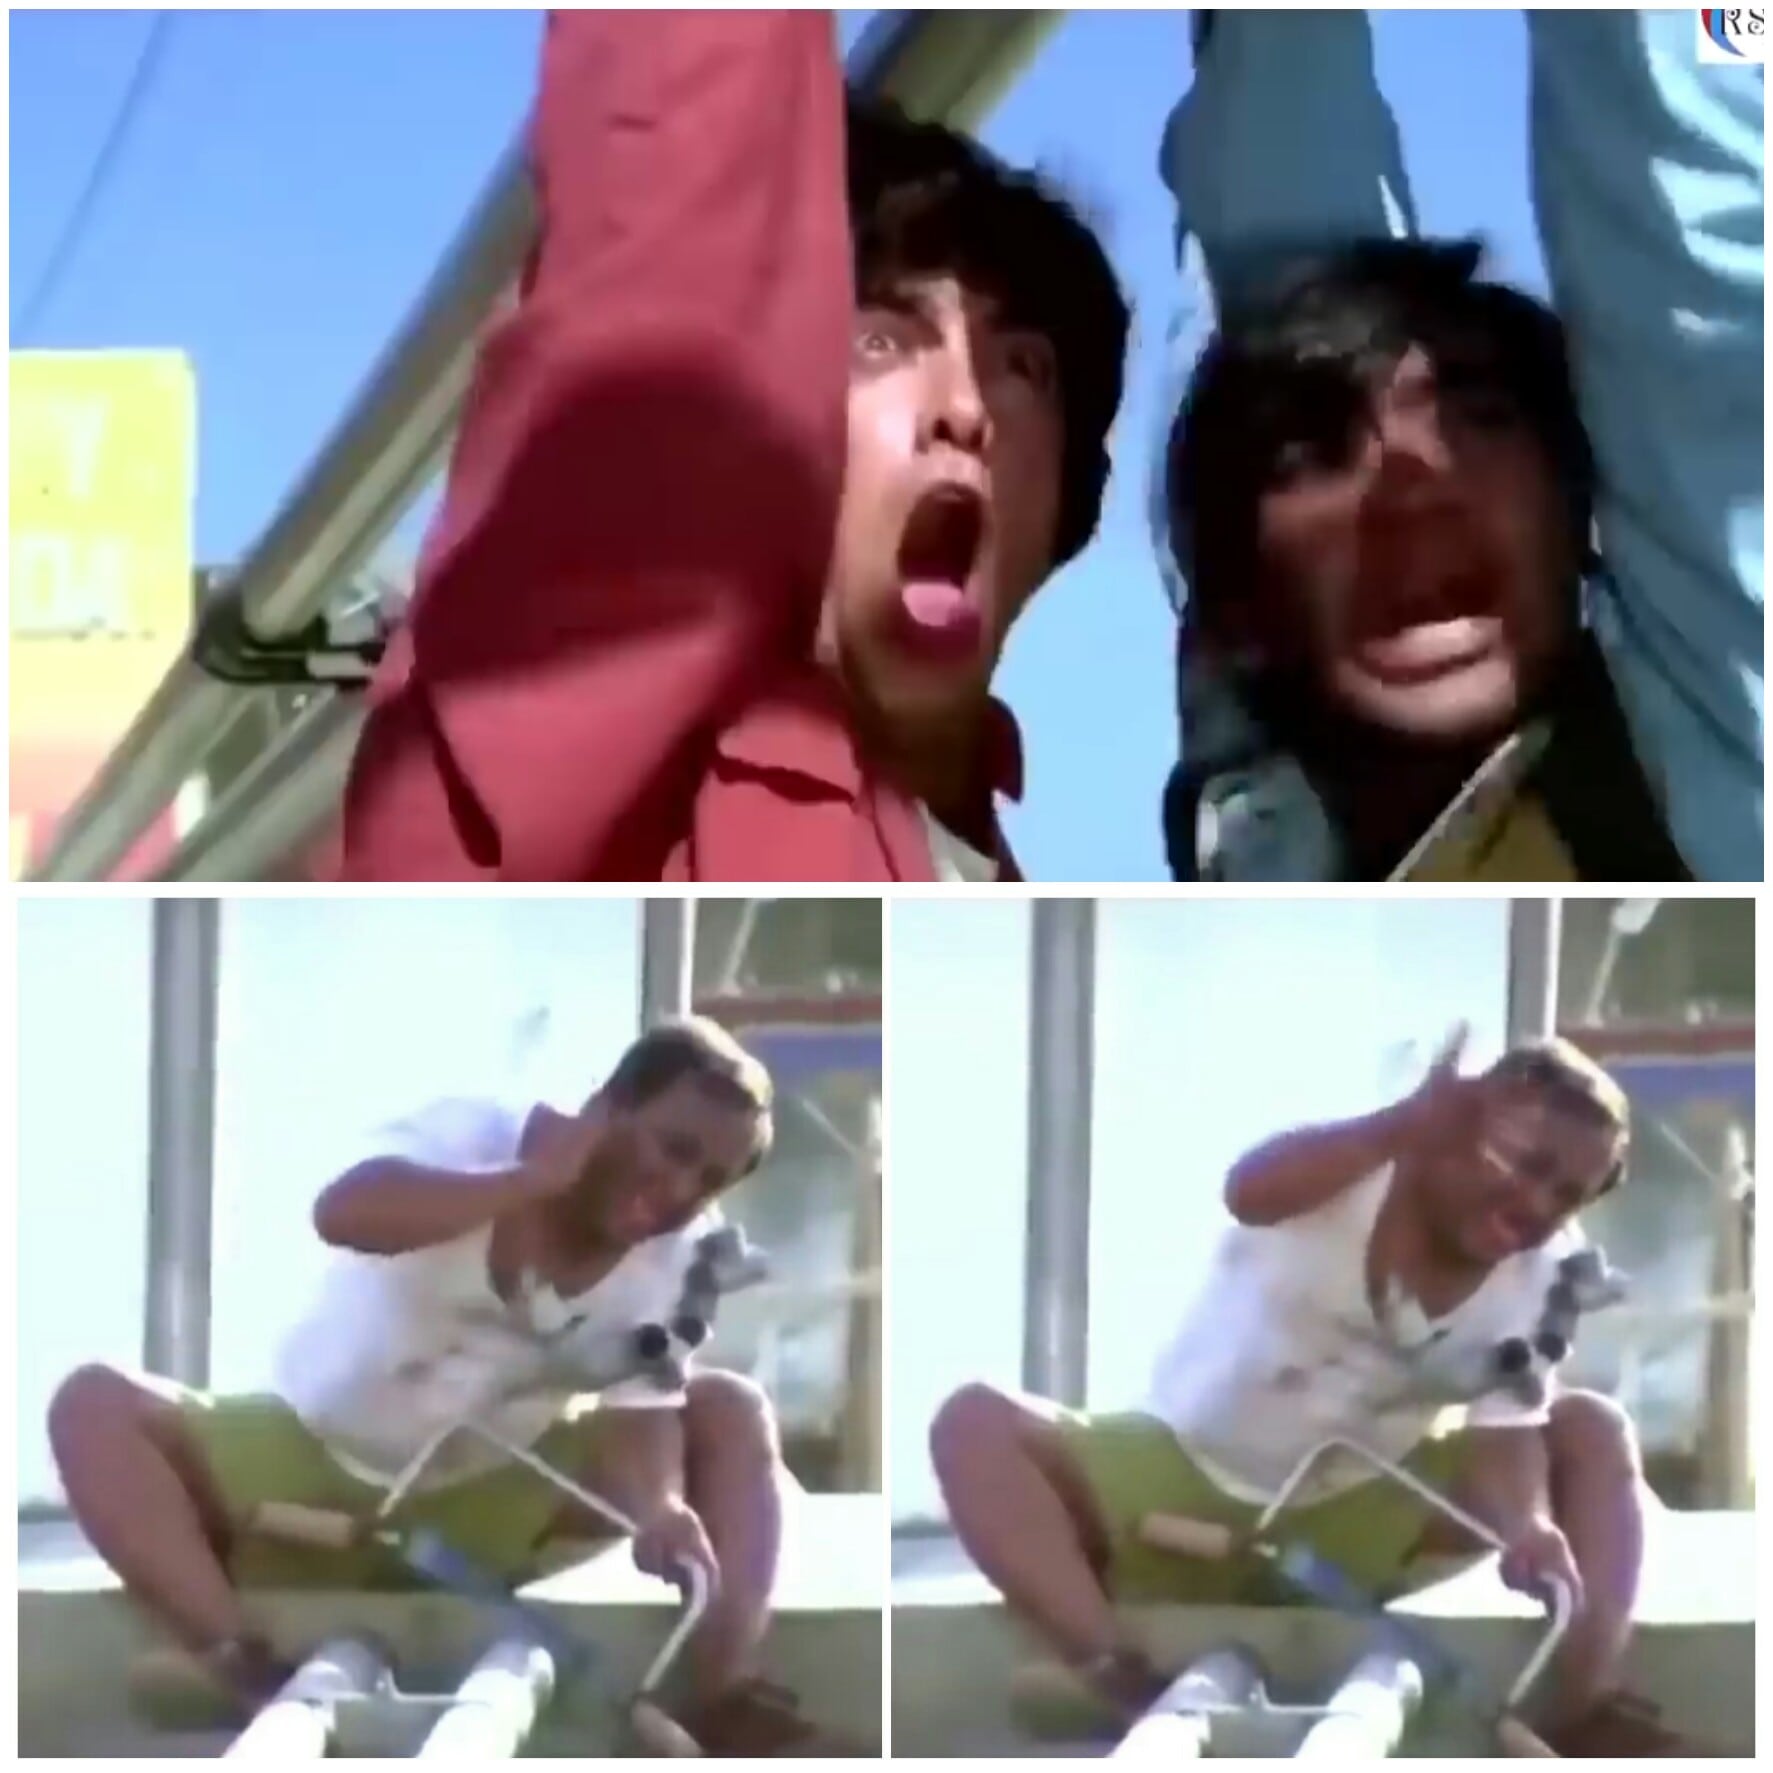 Ajay and Aamir shouting at the deaf man who is cutting pipe ishq movie meme template